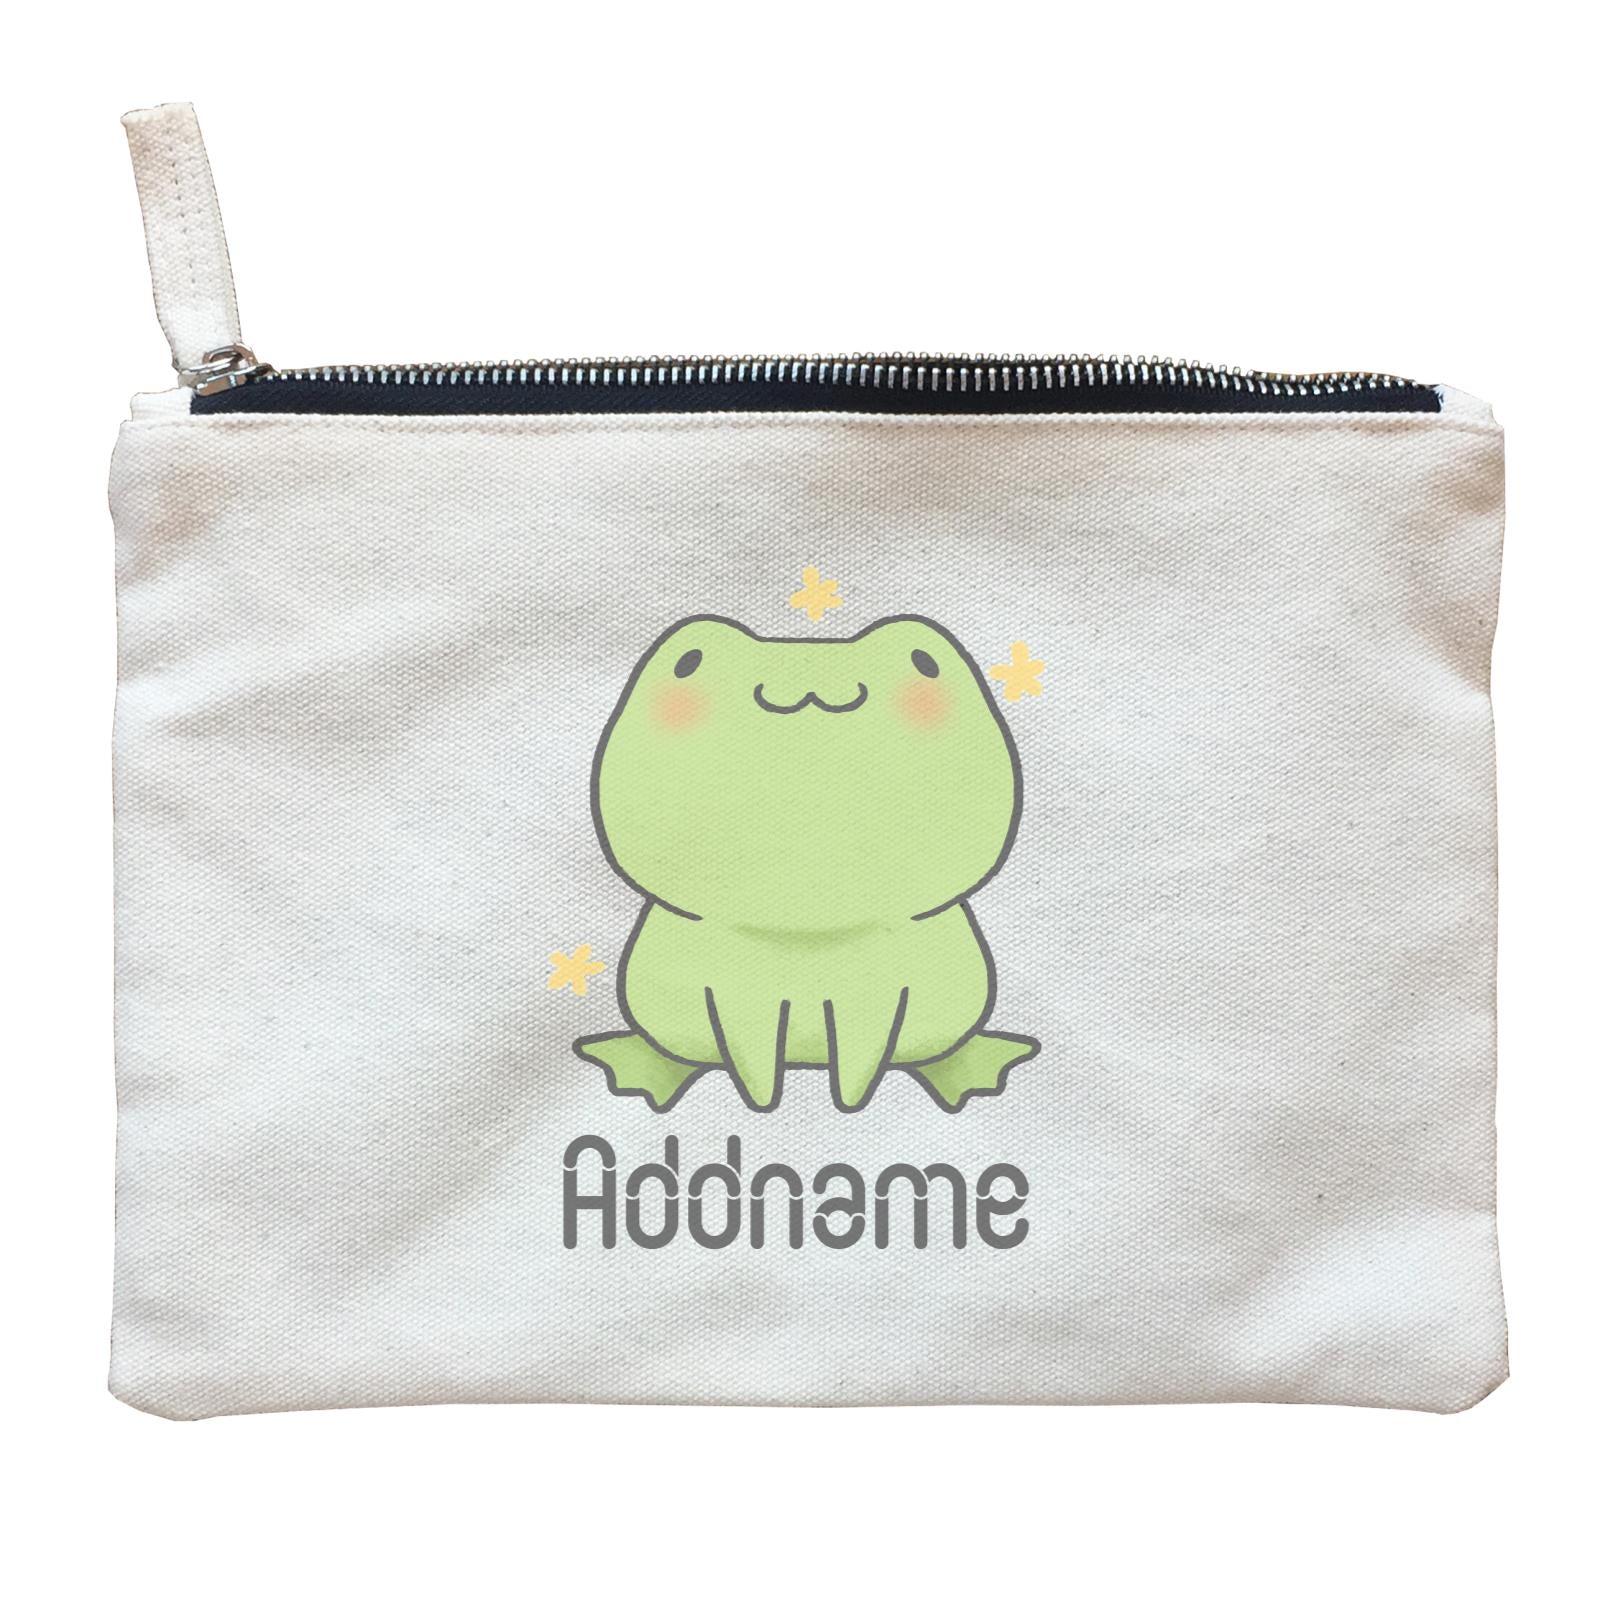 Cute Hand Drawn Style Frog Addname Zipper Pouch